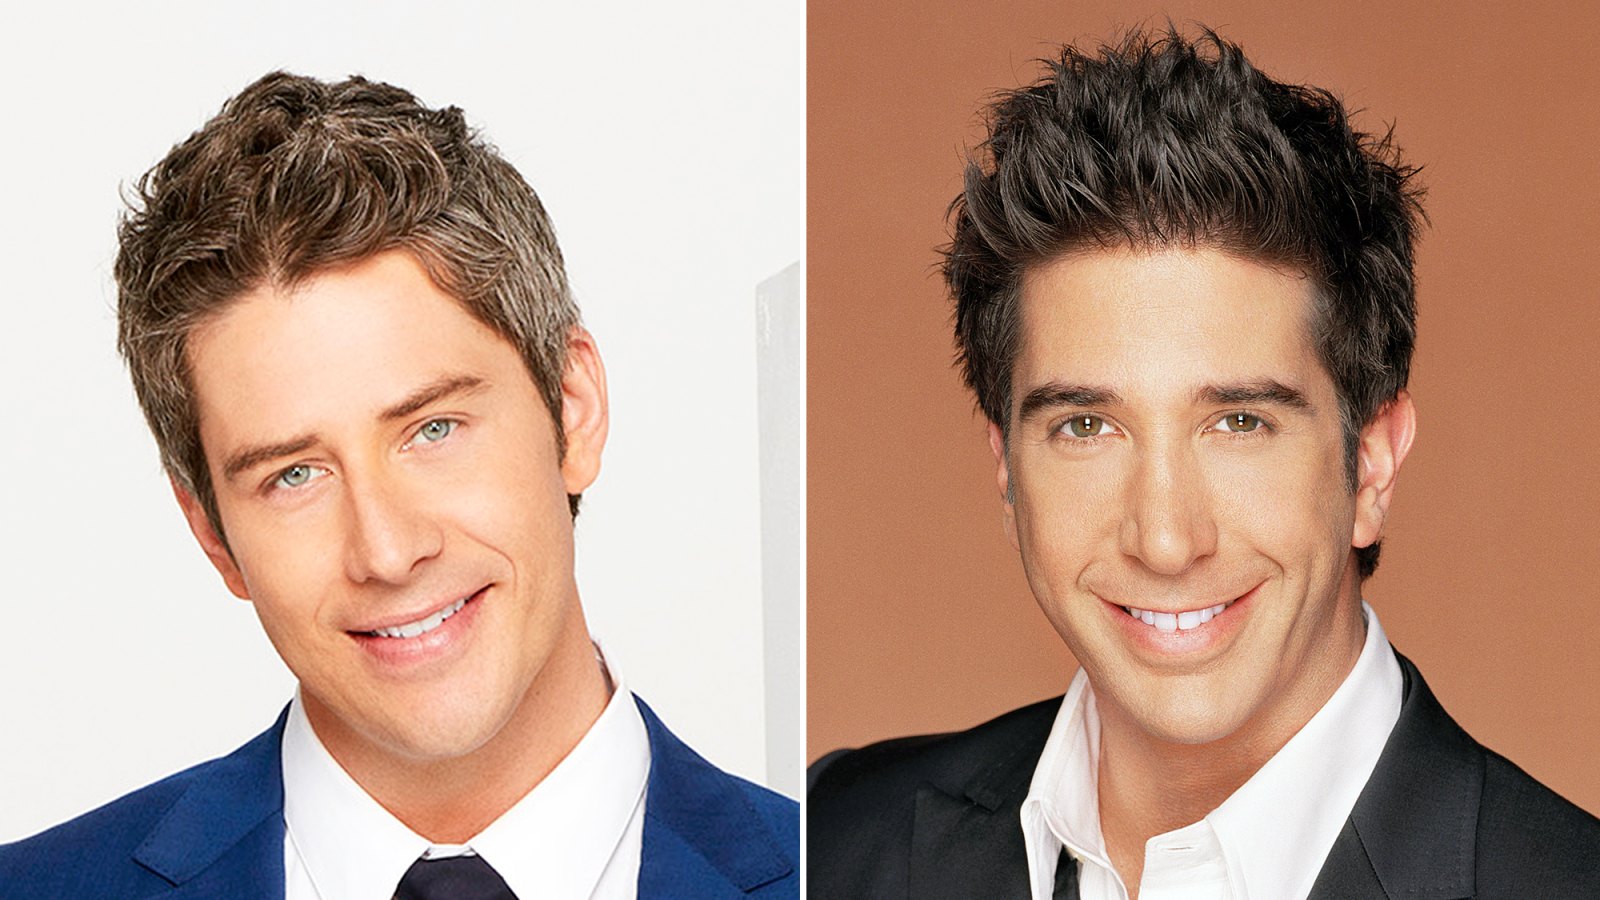 Arie Luyendyk, Jr and David Schwimmer as Ross on Friends